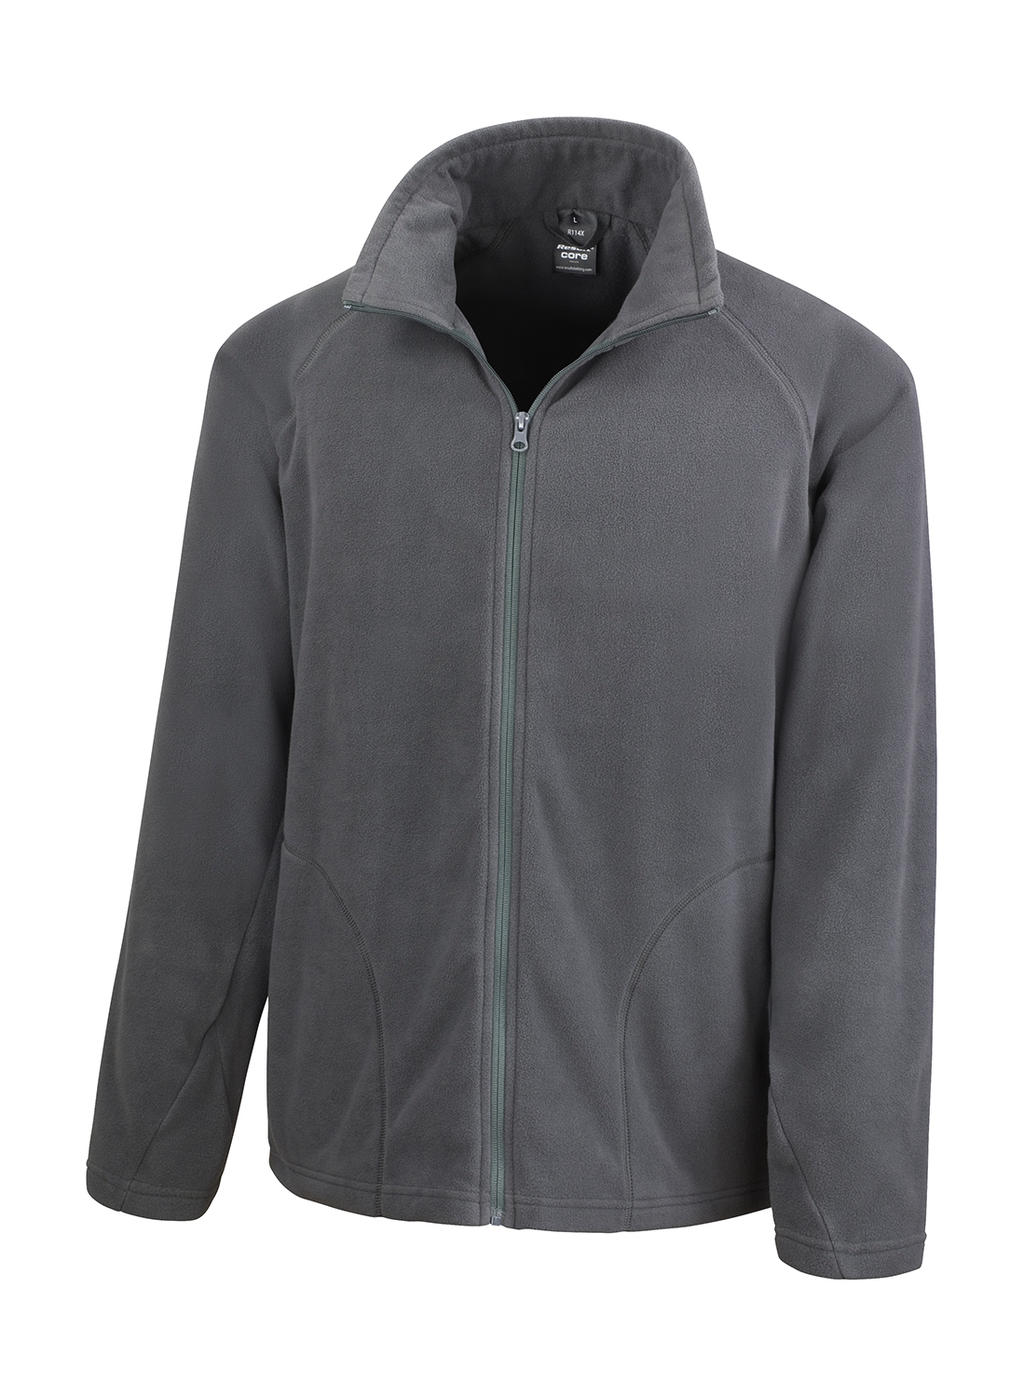  Microfleece Jacket in Farbe Charcoal